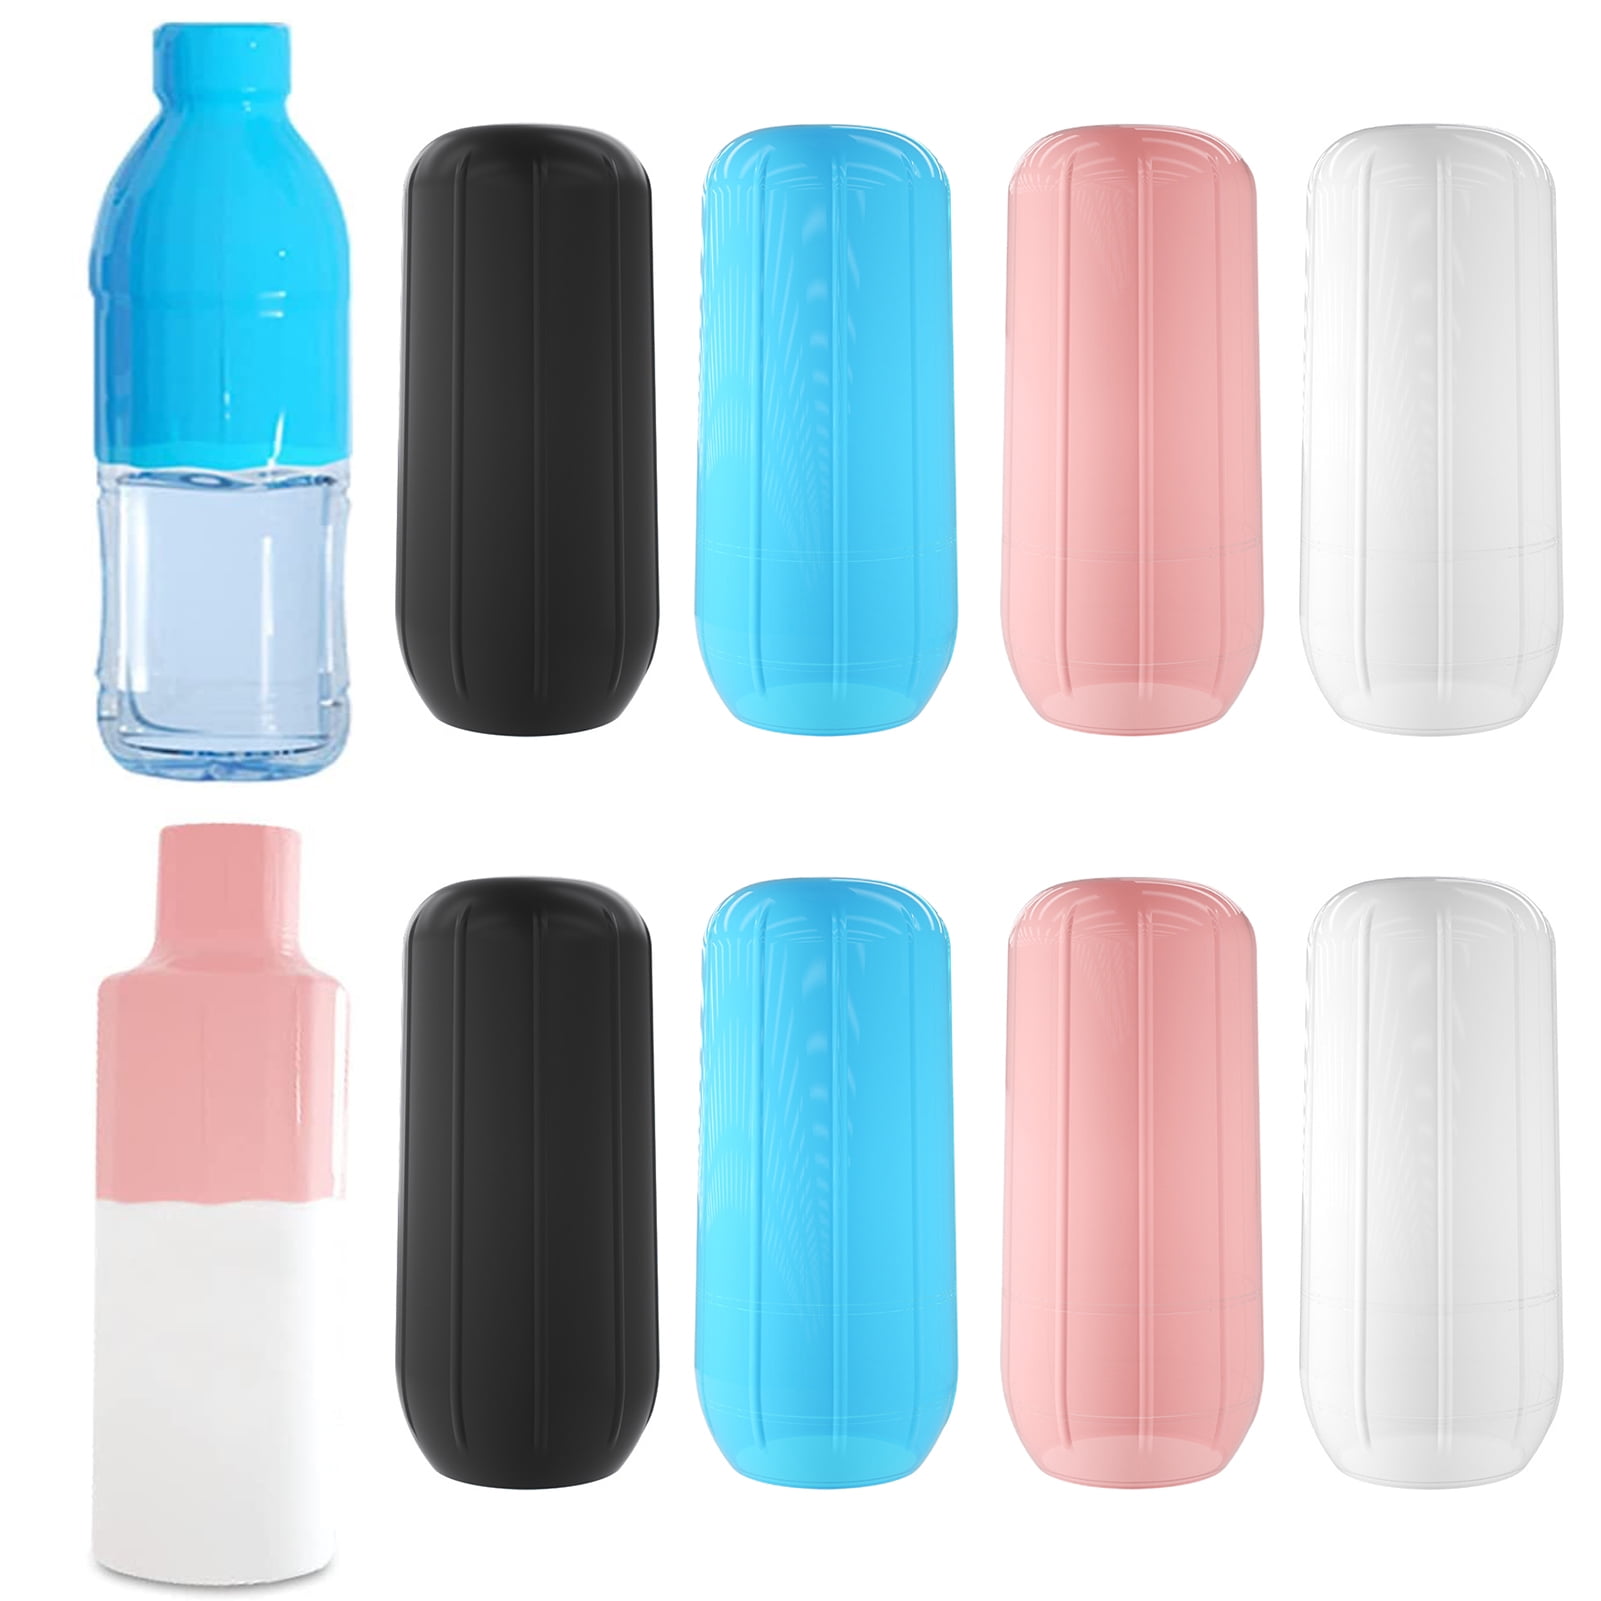  NELSHP Travel Bottle Covers,8 Pack Silicone Travel Size  Container Sleeves,Stretching Travel Accessories for Shampoo Lotion  Conditioner Wash Body Bottles(Blue/Black/White/Pink) : Beauty & Personal  Care